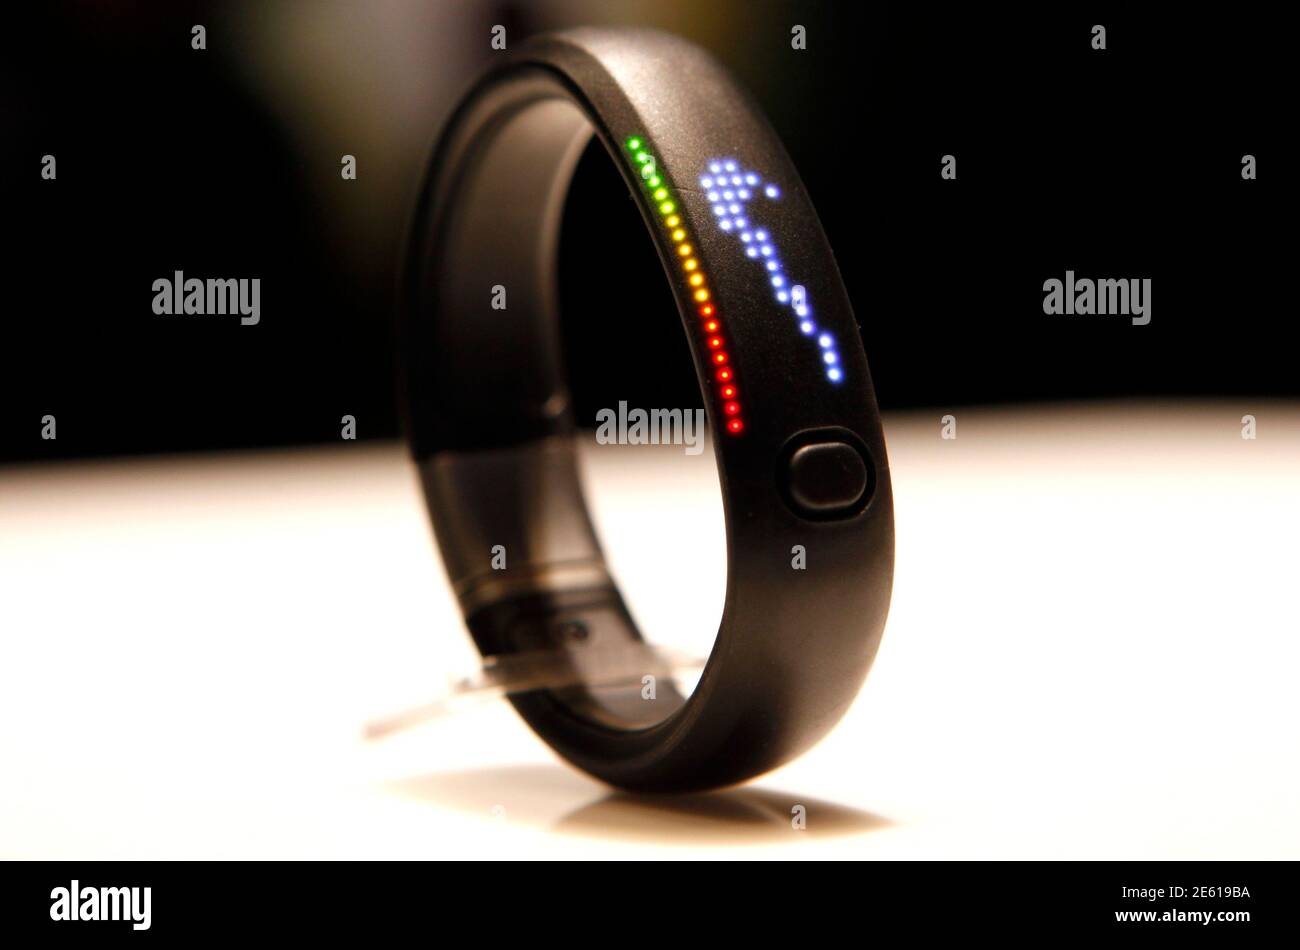 The new NIKE+ FuelBand, an innovative wristband that tracks and measures  everyday movement for, what Nike says, is to motivate and inspire people to  be more active, is seen on display at